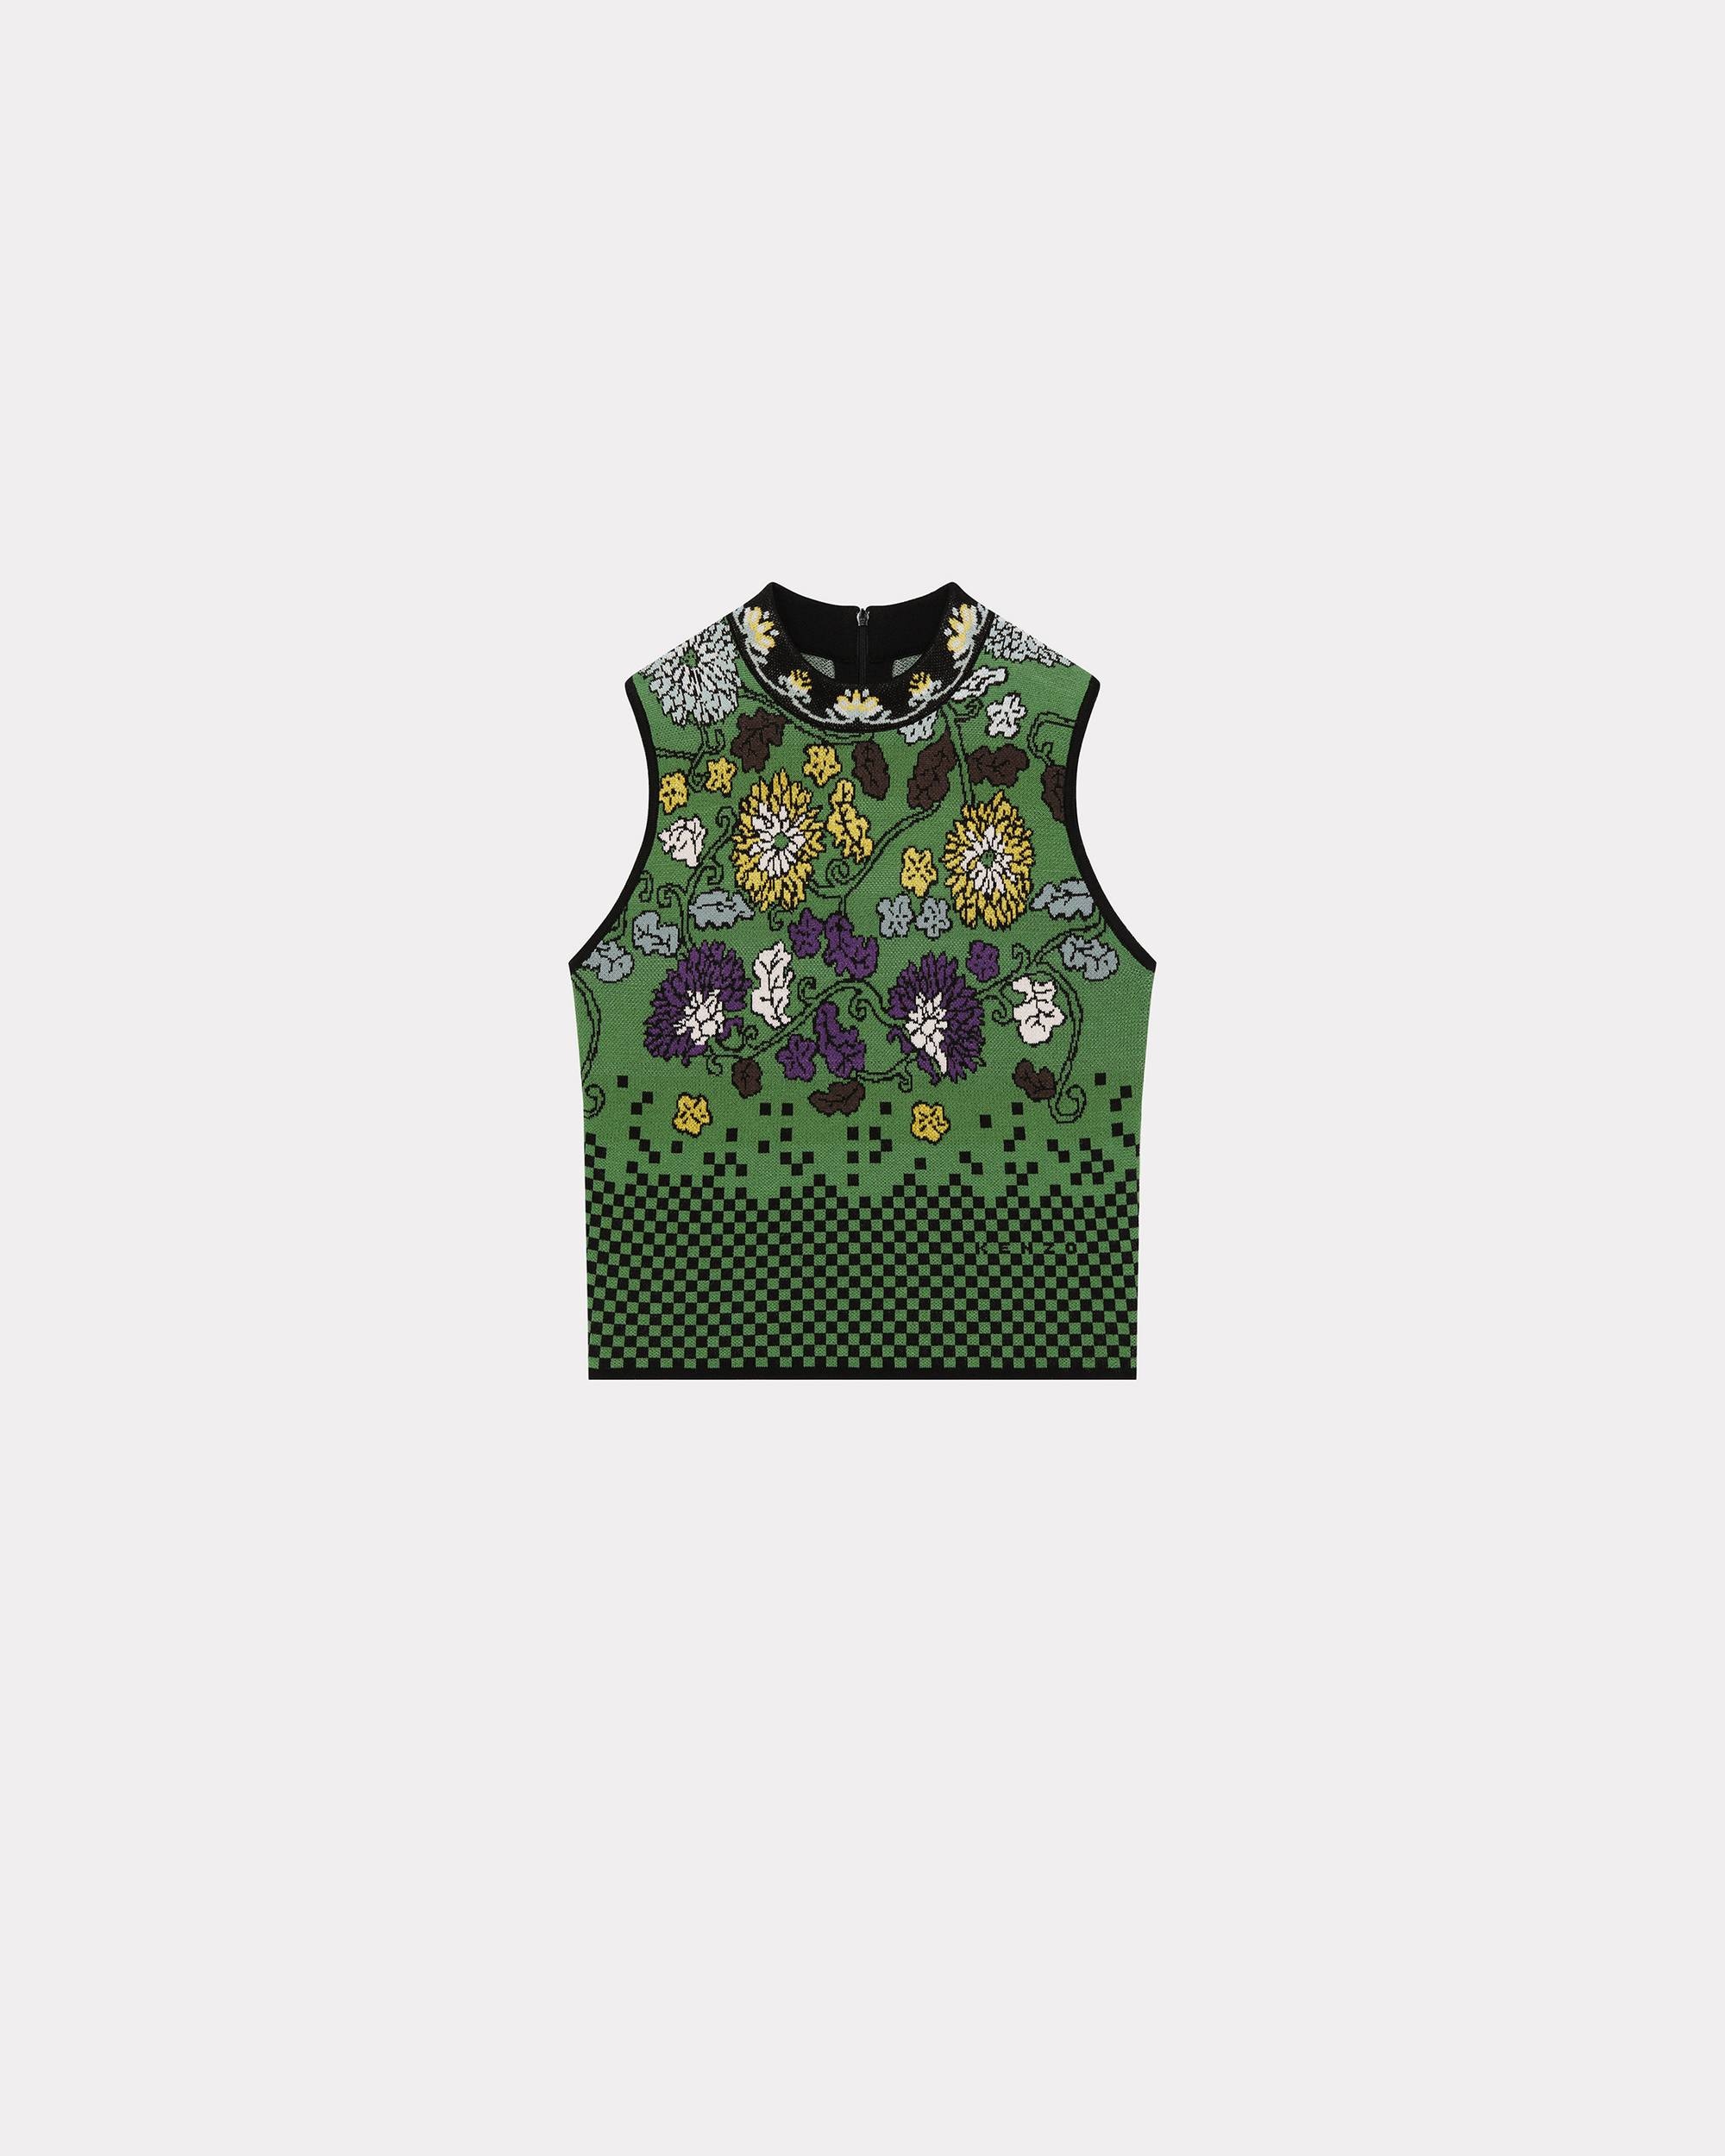 'KENZO Archive Floral' jumper - 1